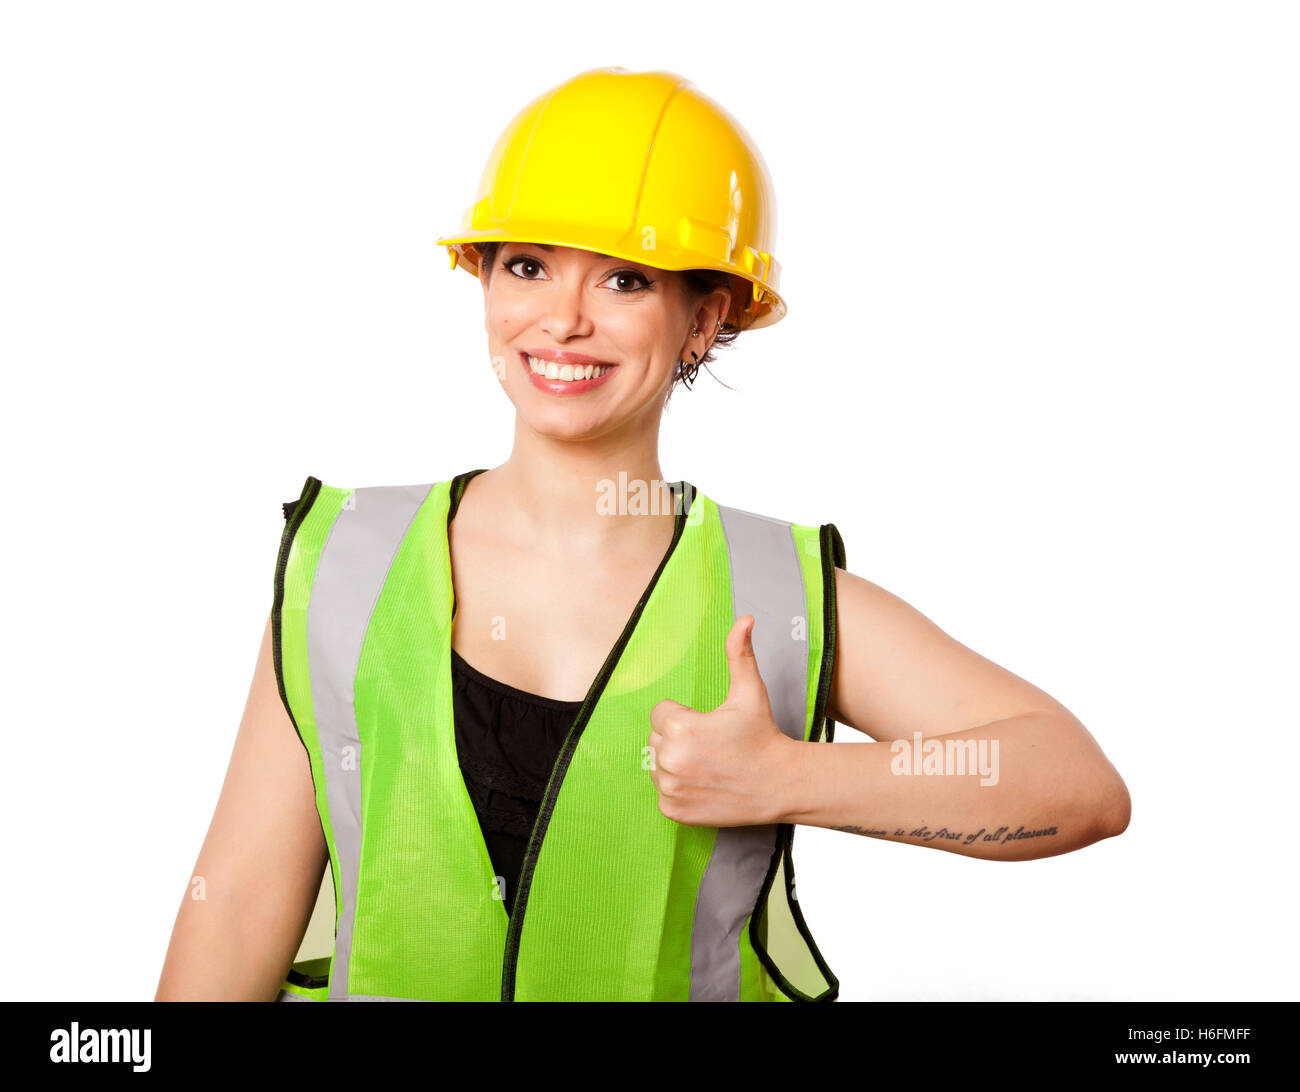 Caucasian young adult woman in her mid 20s wearing reflective yellow safety helmet and safety vest' giving the camera the thumbs Stock Photo